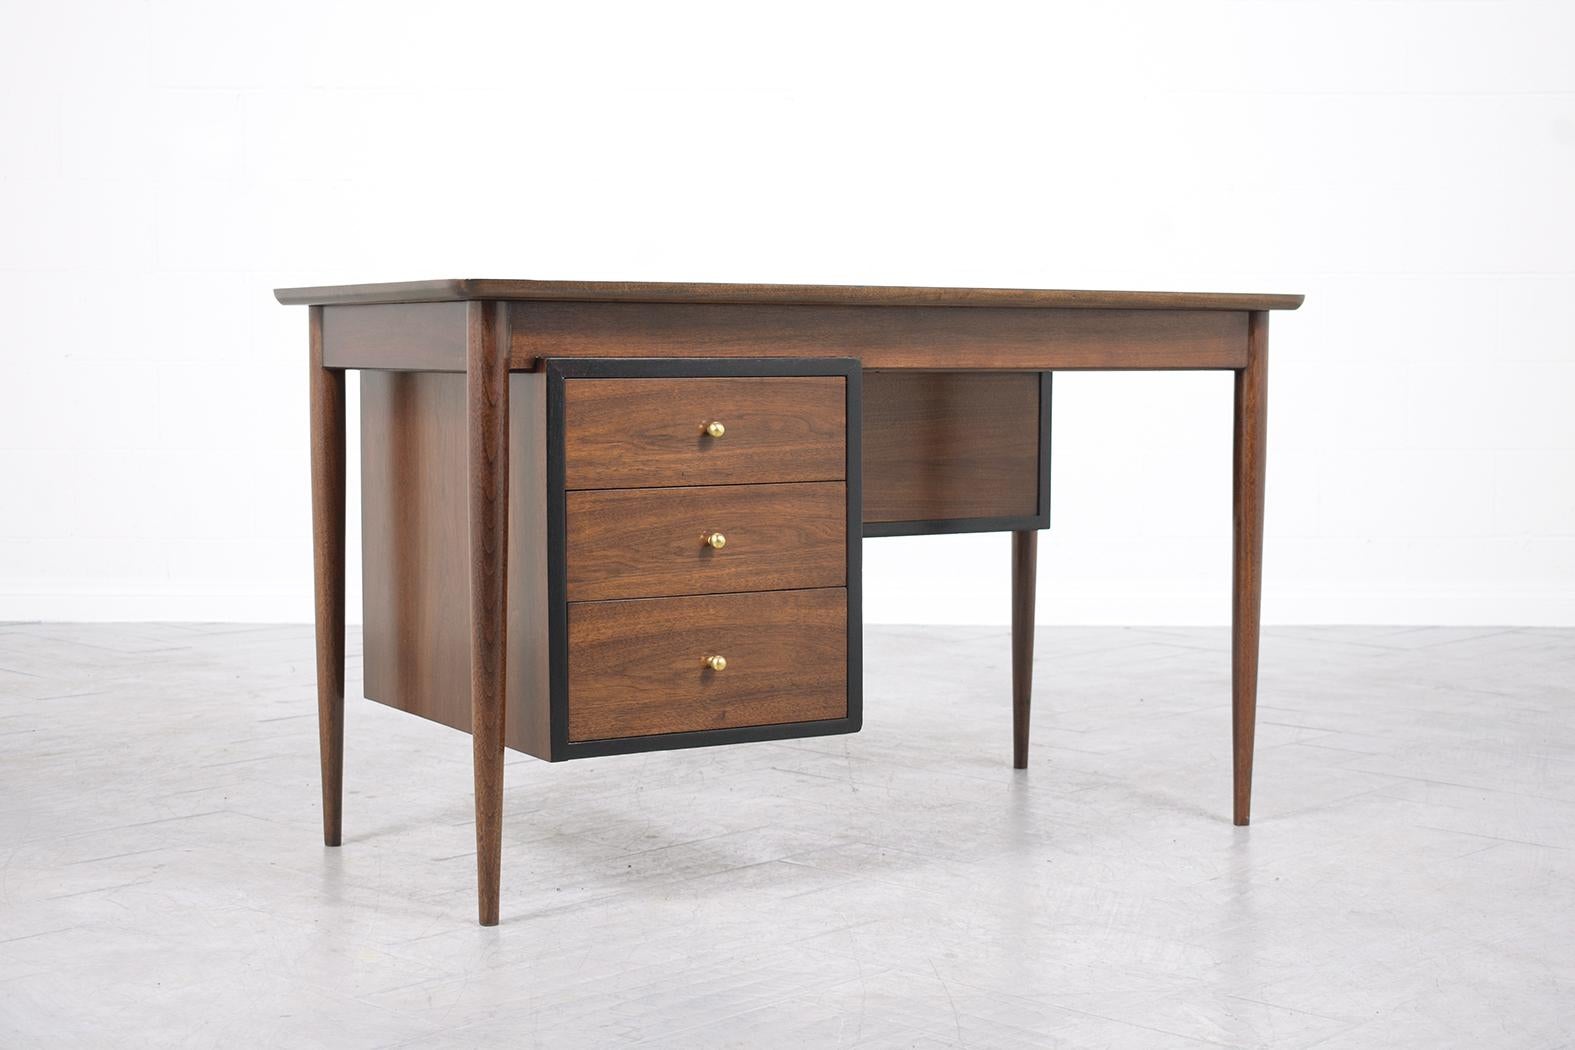 Lacquer Danish Modern Executive Desk in Walnut with Ebonized Accents